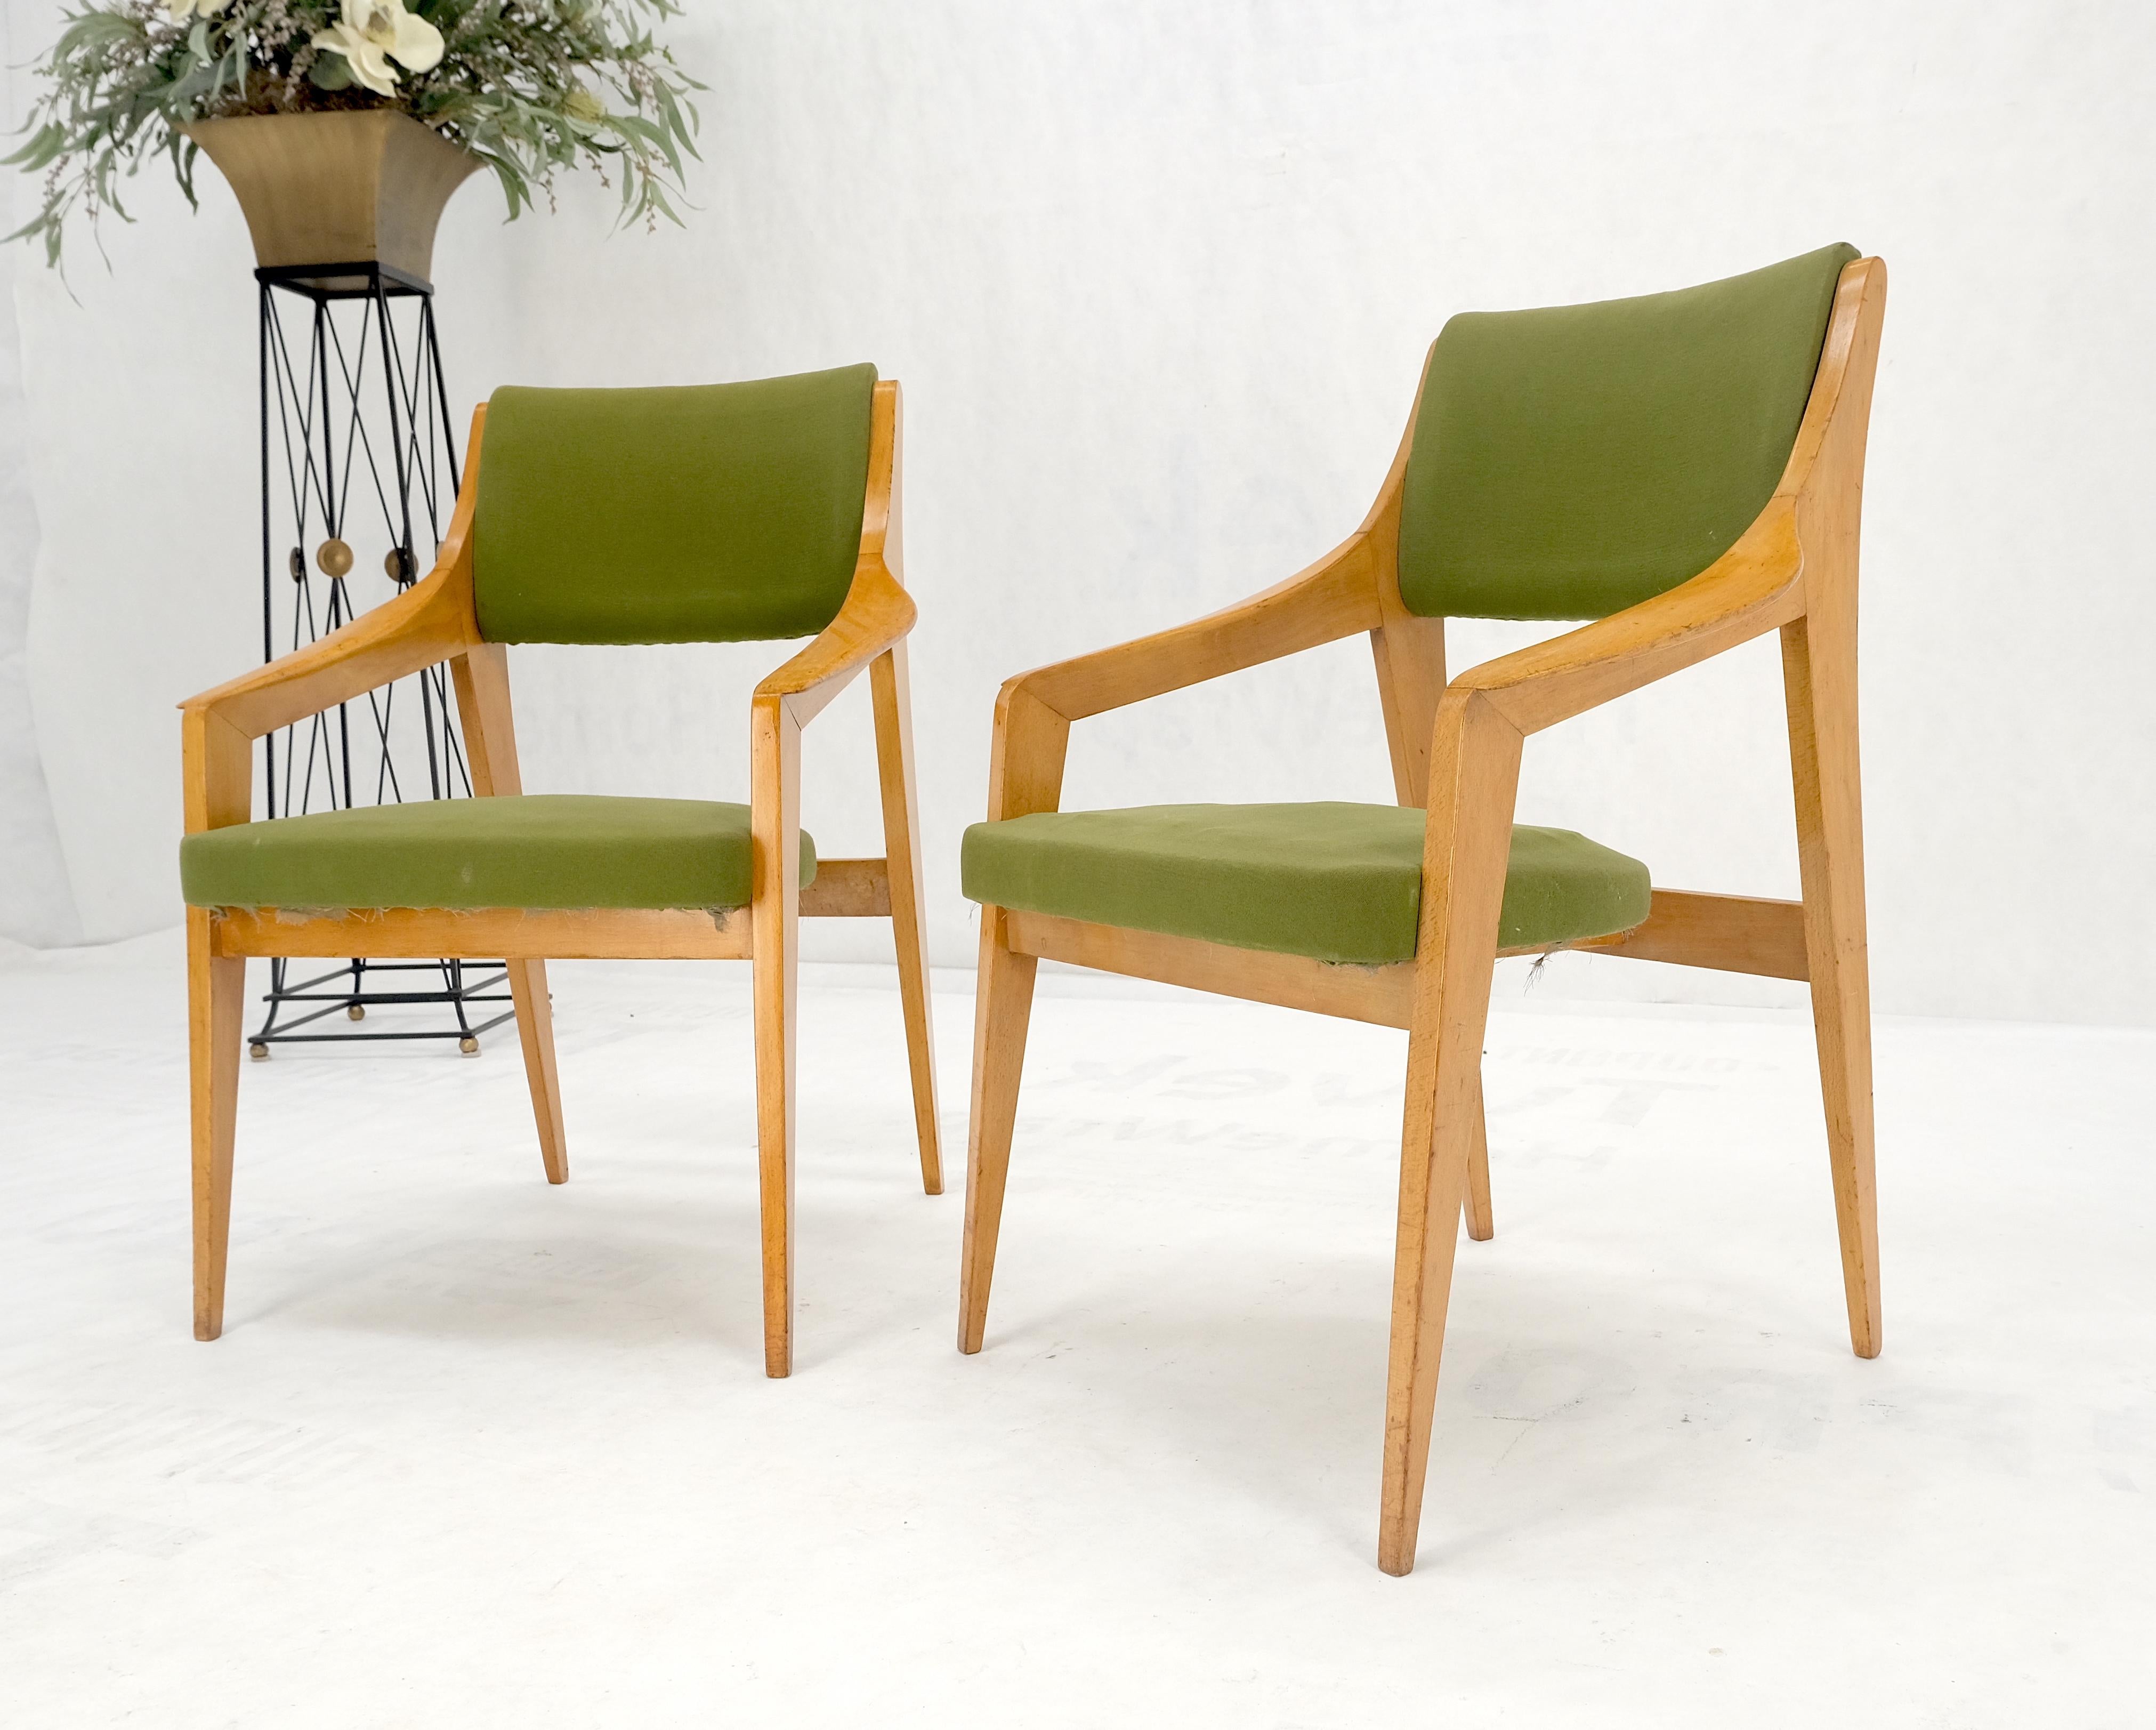 Pair of c1950s Blond Birch Scandinavian Swedish Arm Chairs Green Upholstery For Sale 6